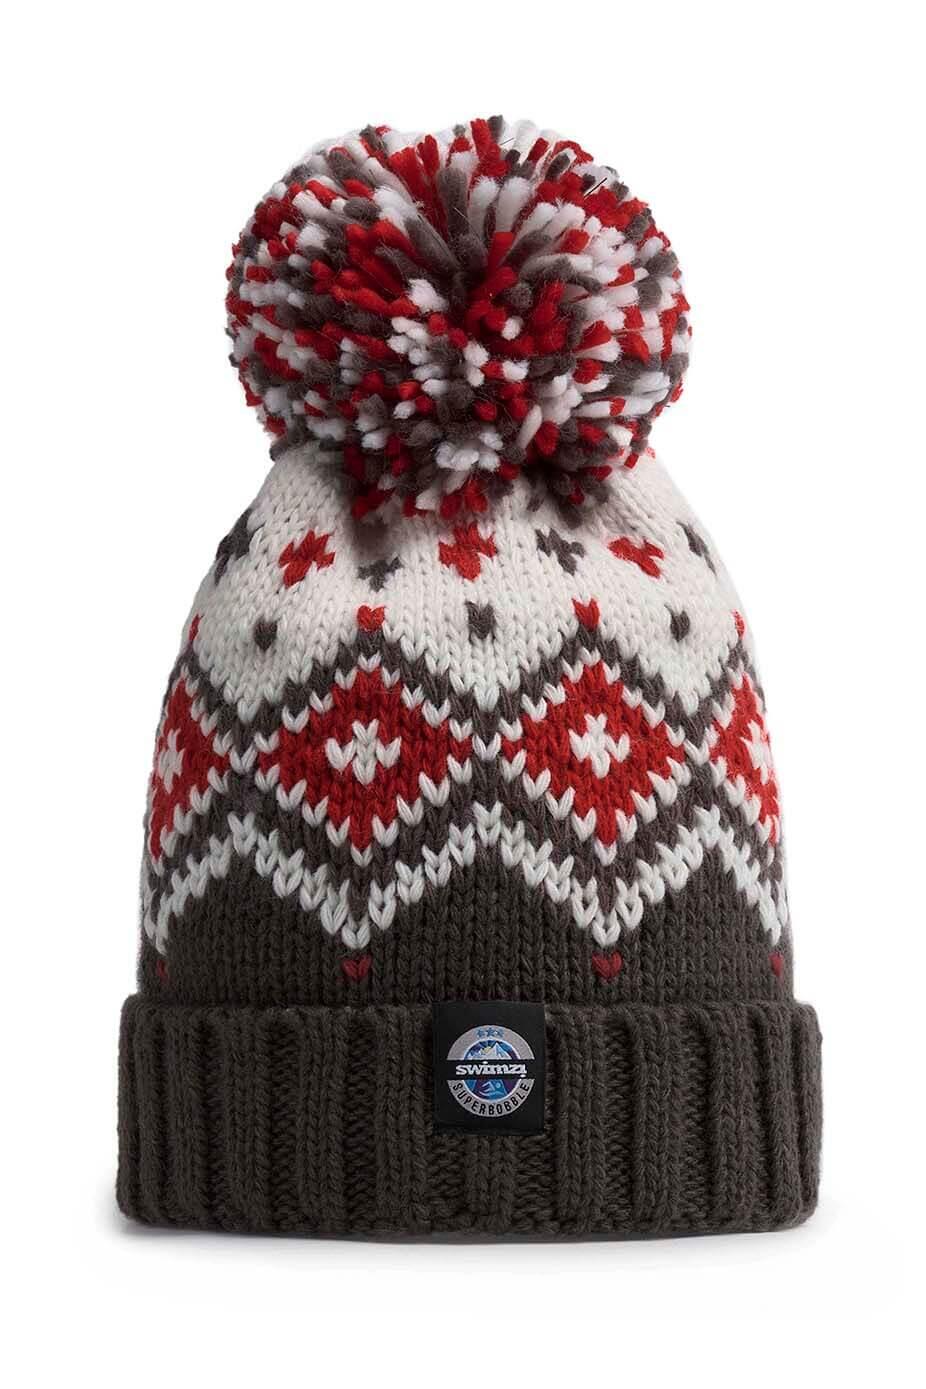 SWIMZI Graphite Red Tyrol Nordic Knit Reflective Superbobble Hat